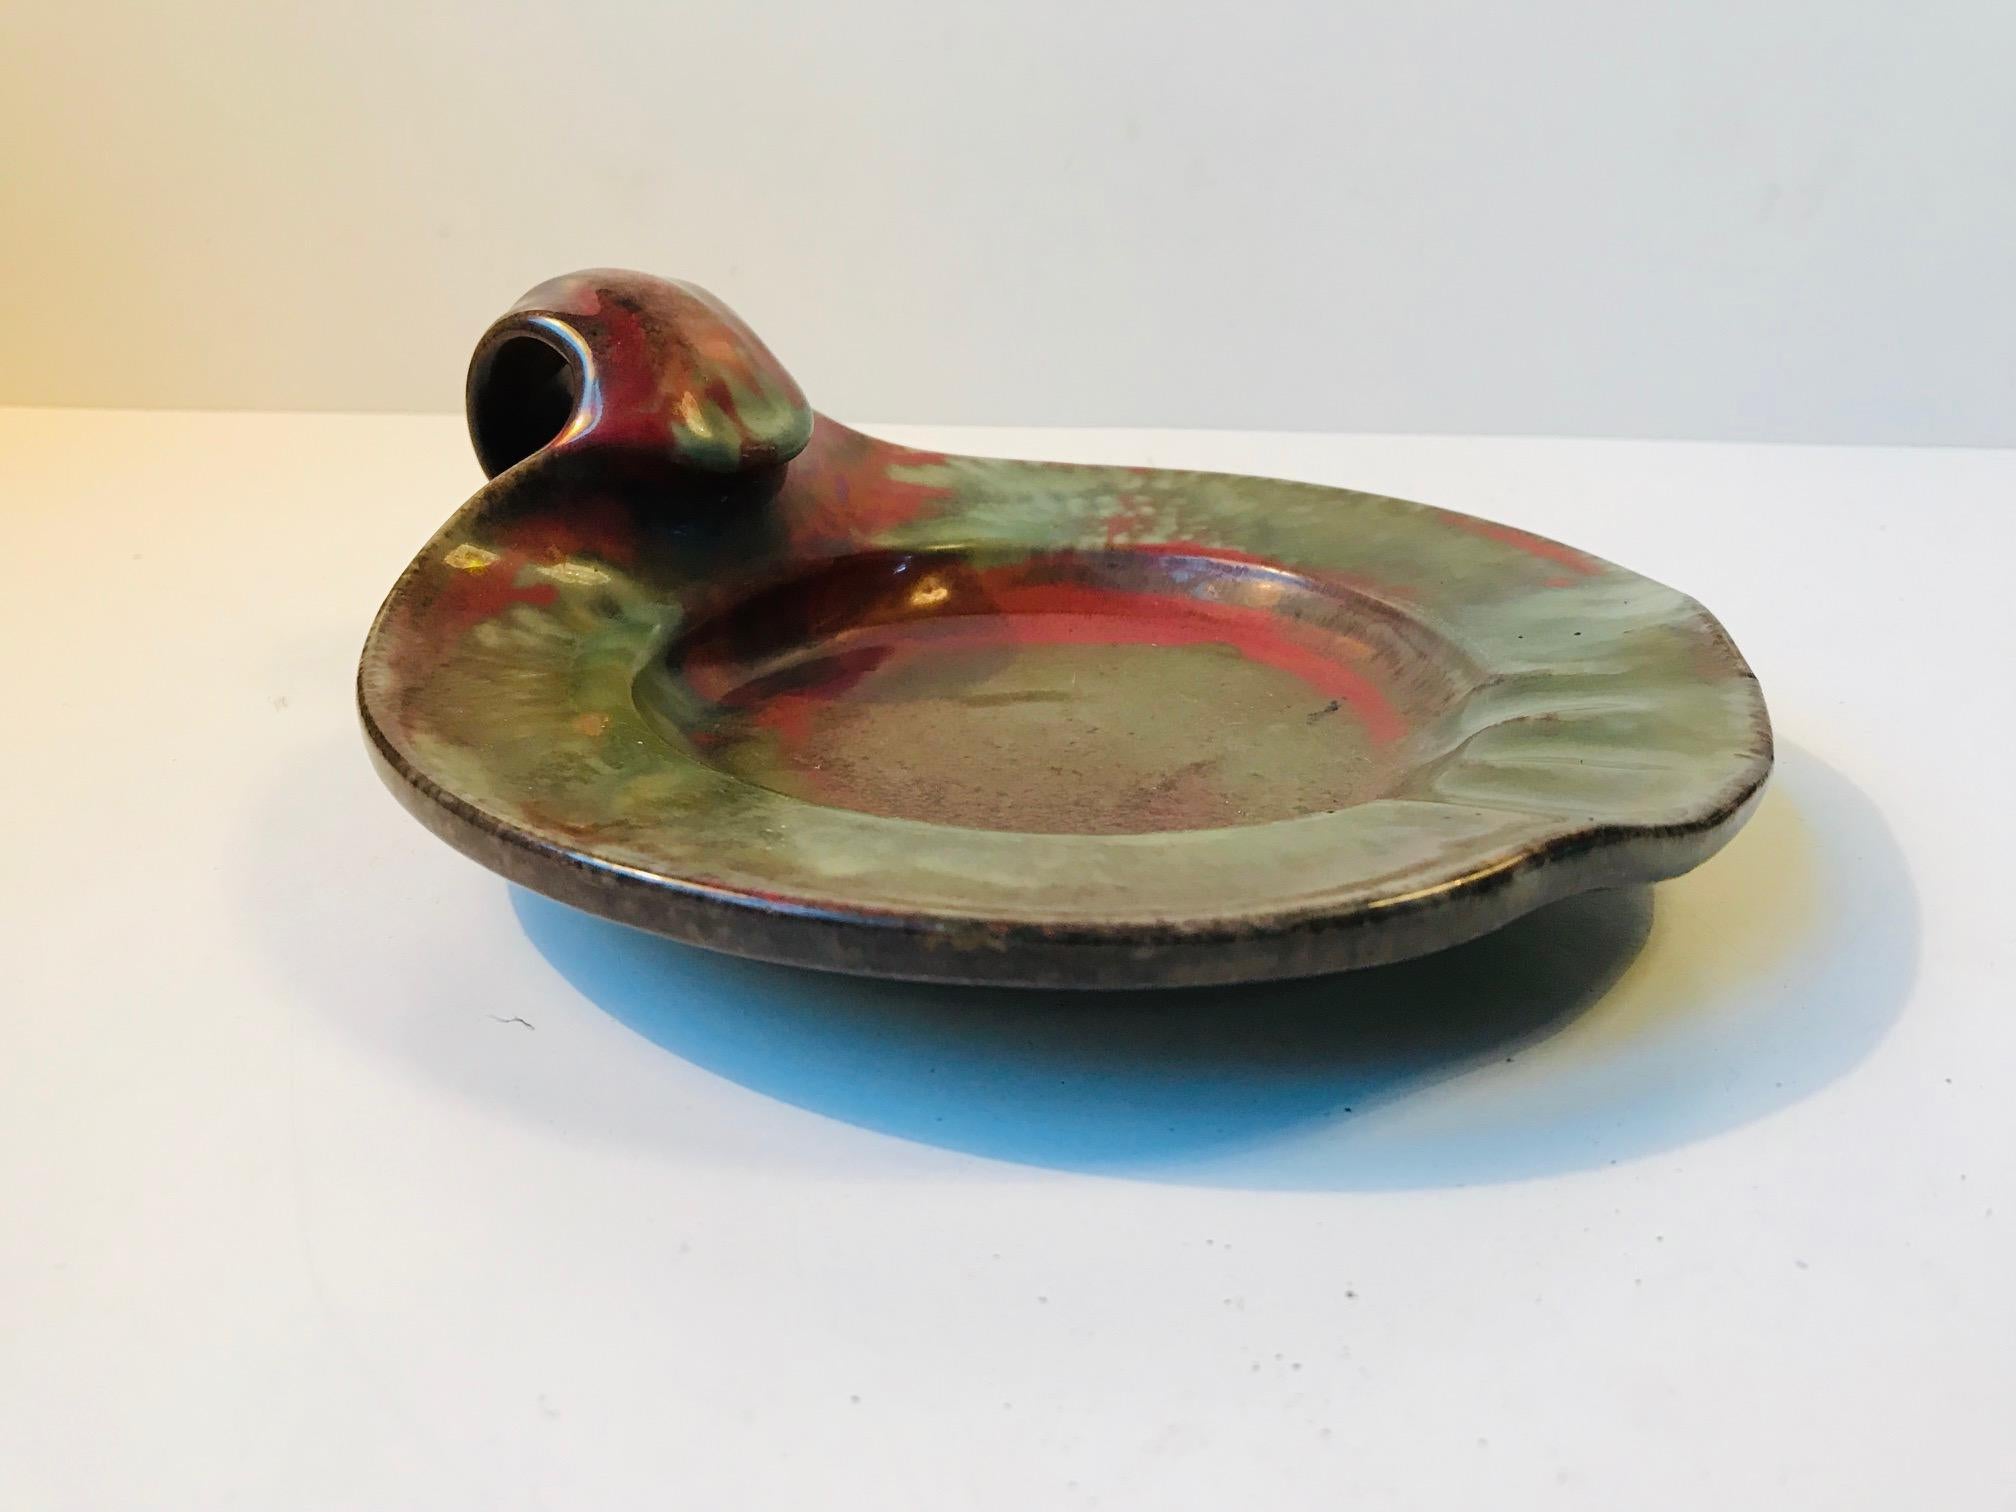 - A handled cigar ashtray in vibrant polychrome glazes
- Designed by the Danish ceramist Niels Peter Nielsen
- This piece was created at Dagnæs Keramik during the 1930s or 1940s 
- The style is reminiscent of Kähler and Michael Andersen.
- H: 6.5